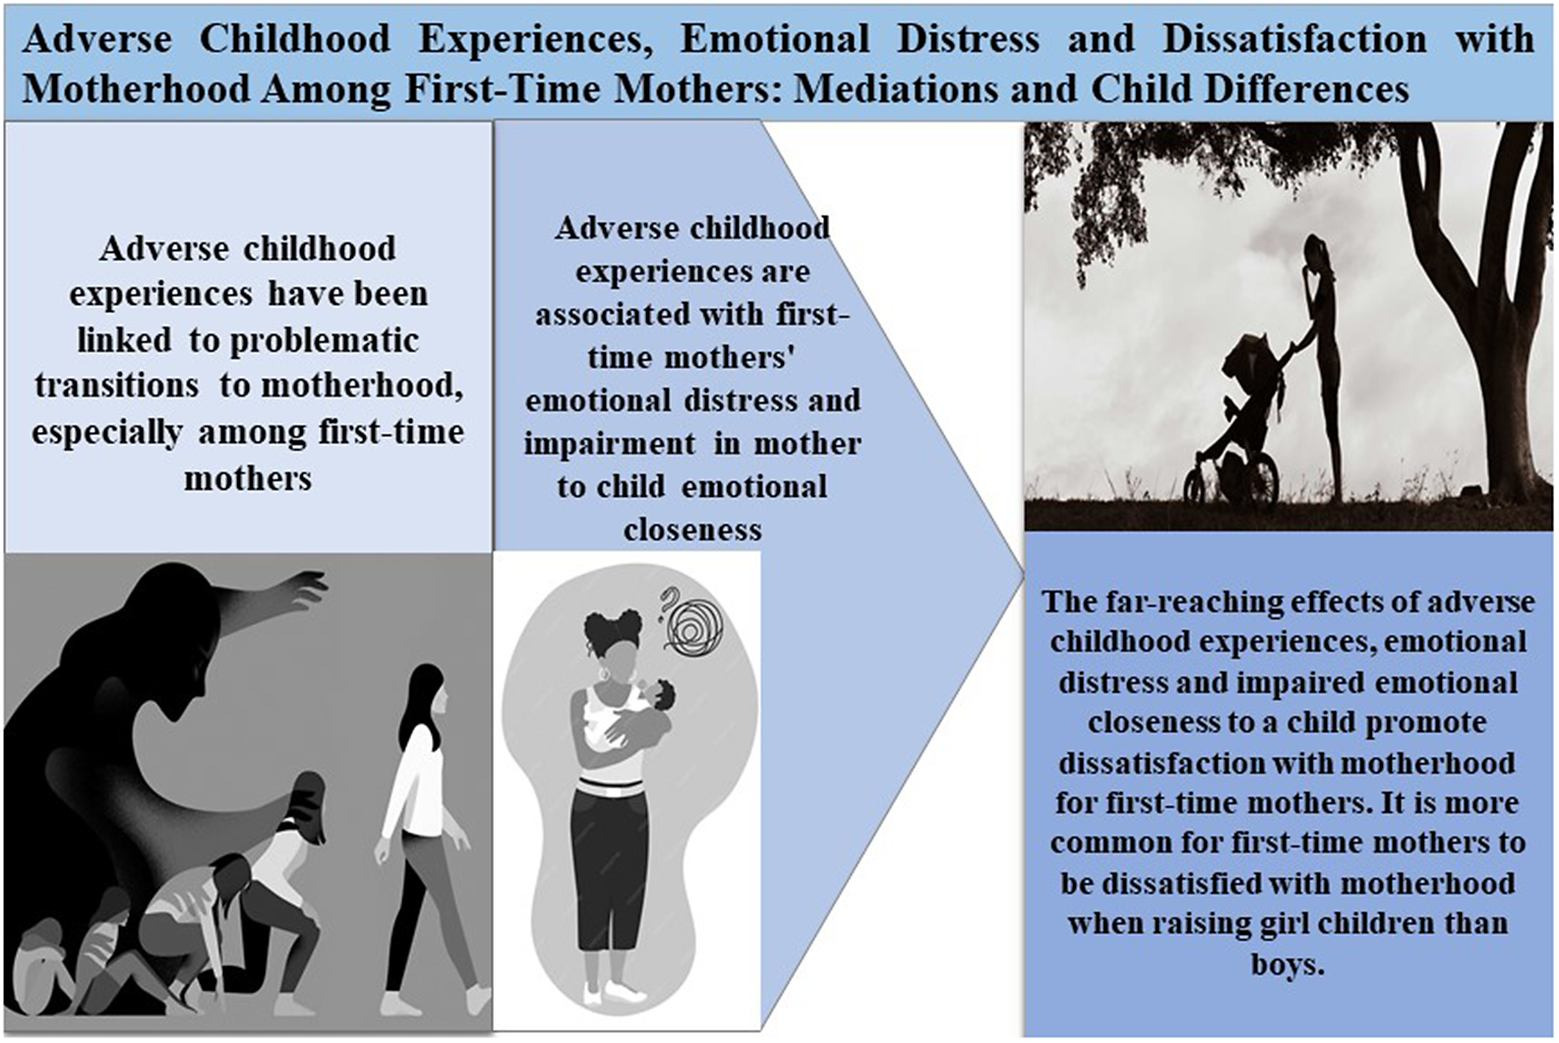 Adverse childhood experiences